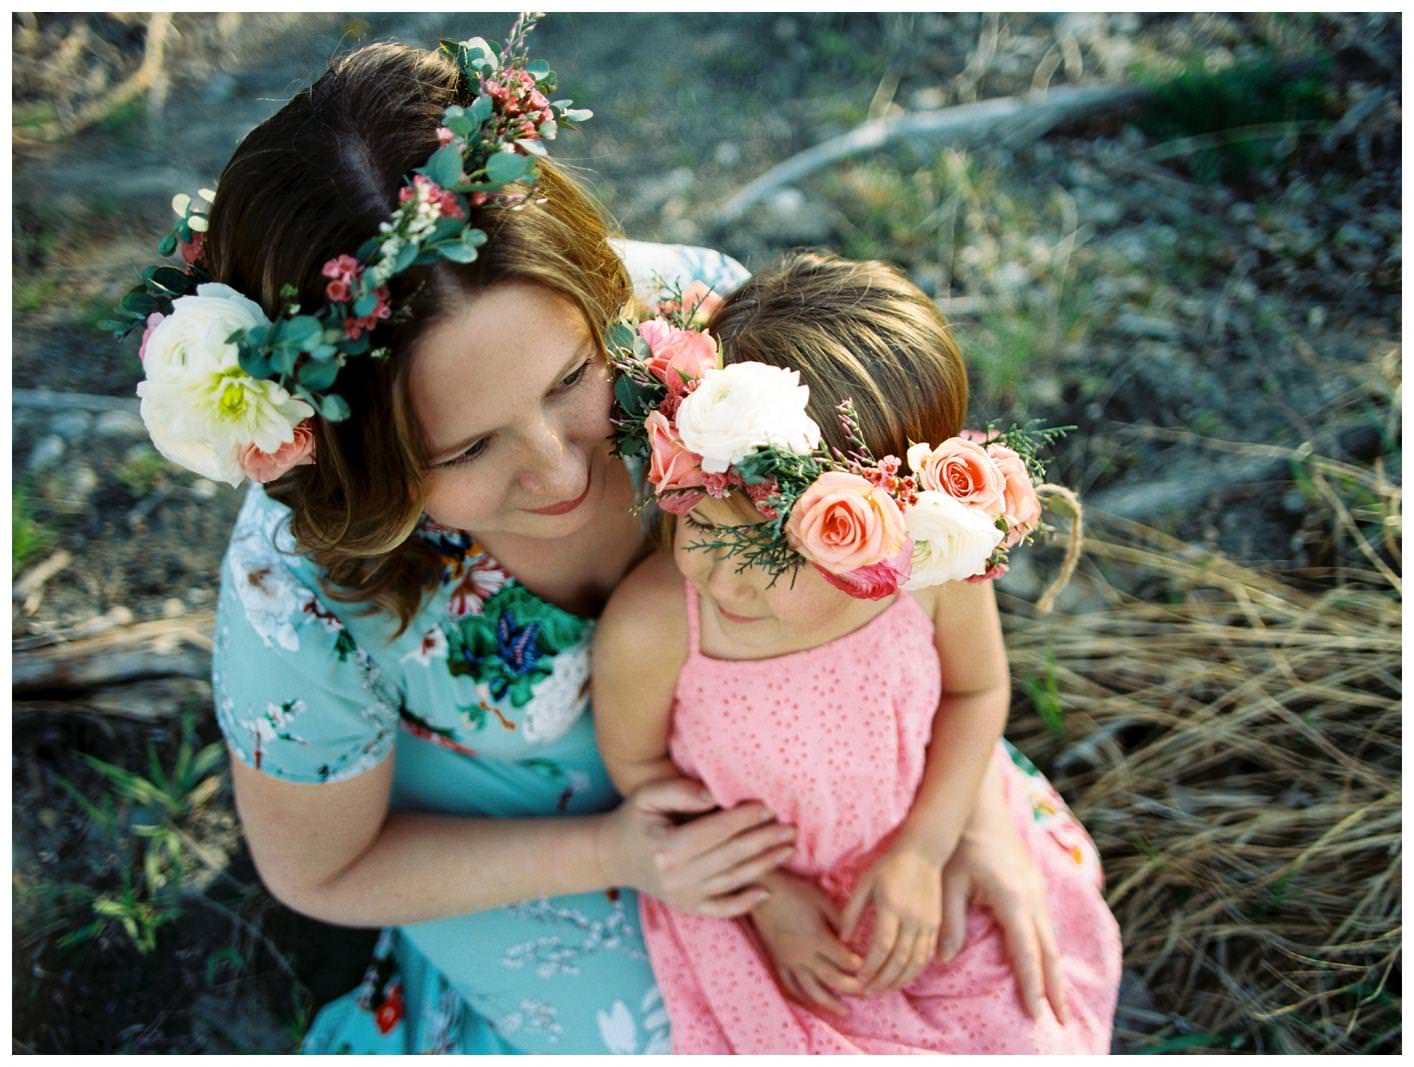 A daughter sits on her mama's lap and both wear floral crowns